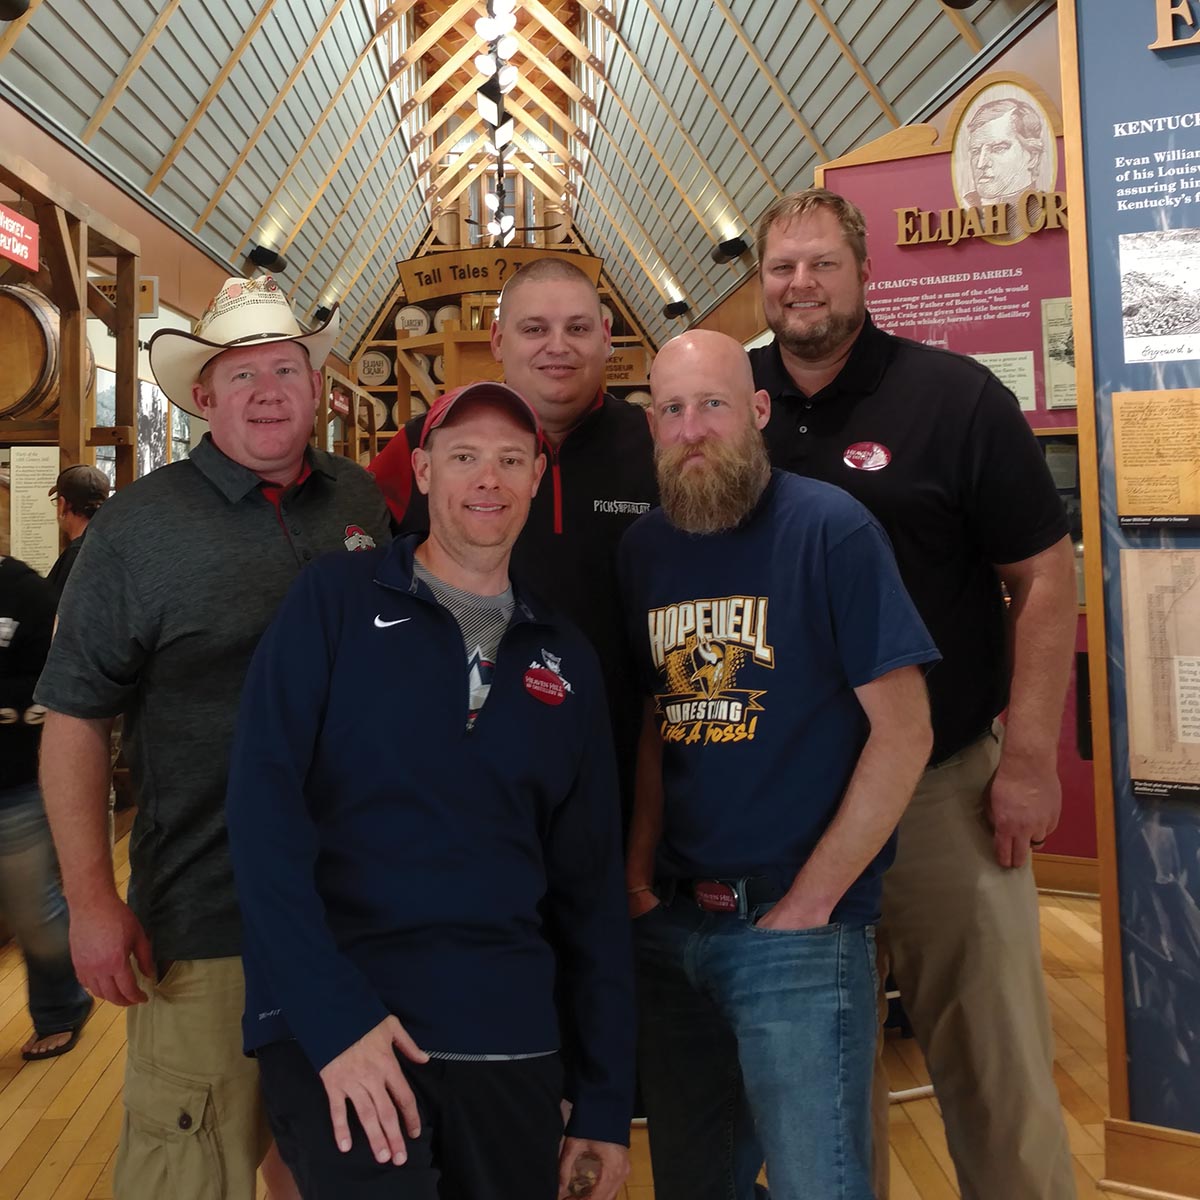 Ryan Marr ’98, Kris Cooper ’98, (second row) Eric Cooper ’97, Craig Trapp ’97 and Ben Dittmar ’97 met the weekend of May 17-20 for a tour of Bourbon Trail in and around Lexington, Kentucky